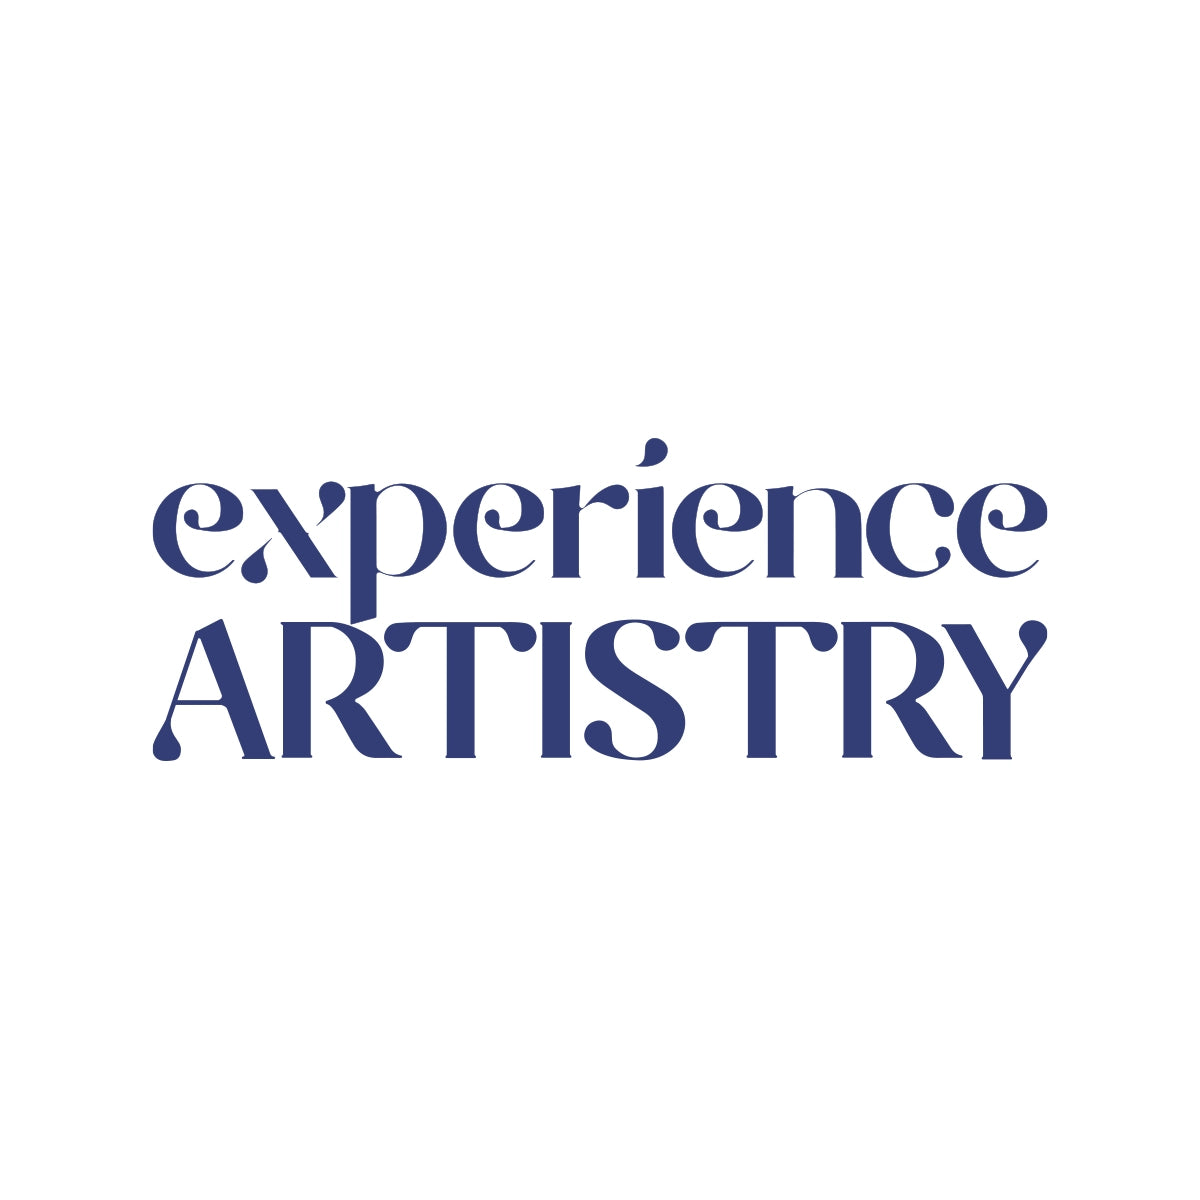 experienceartistry.com